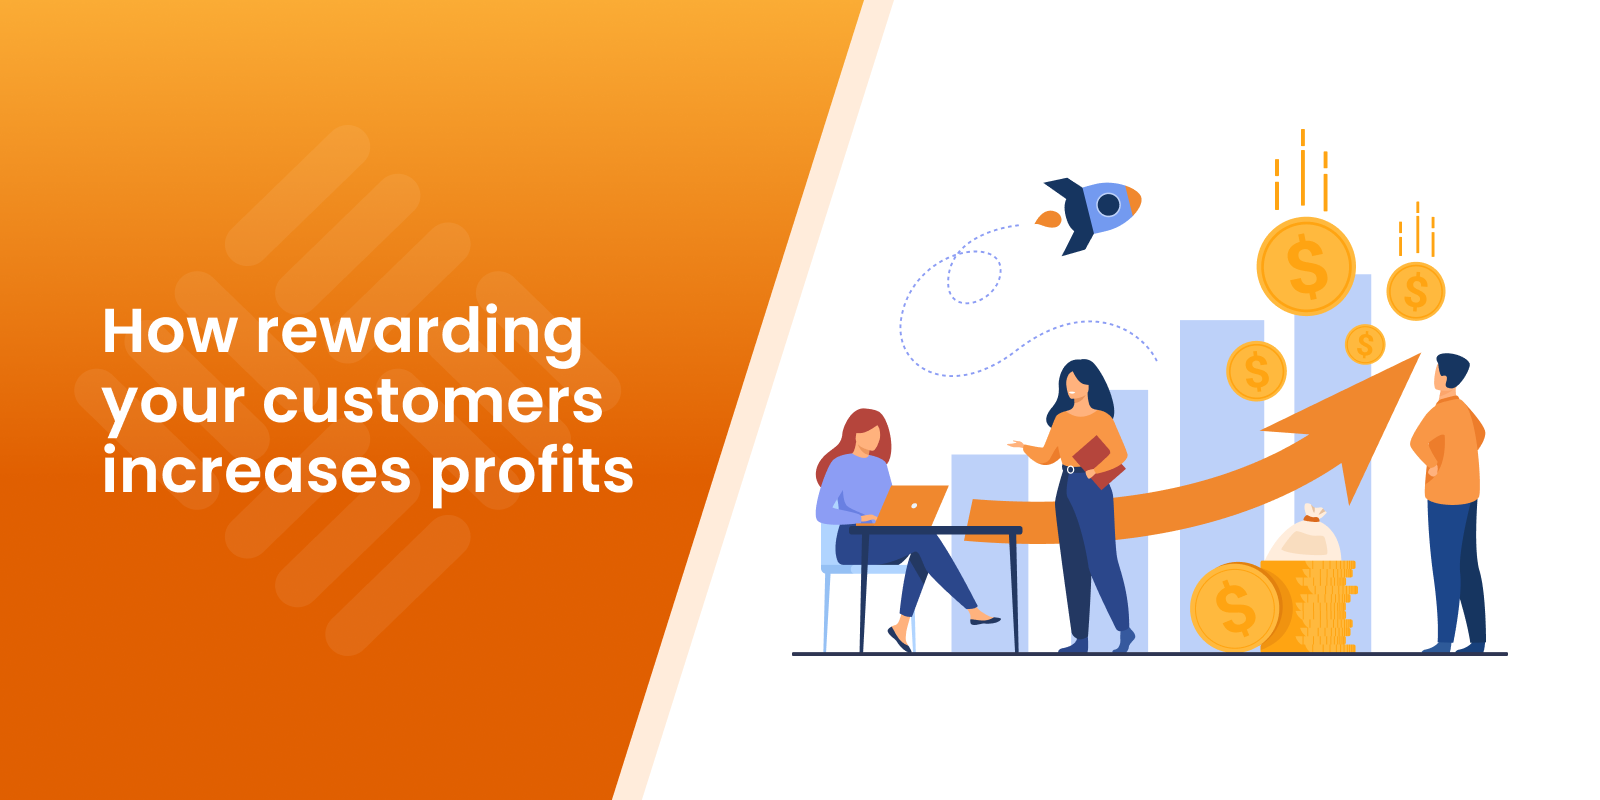 How rewarding your customers increases profits: 5 research-based facts on loyalty programs